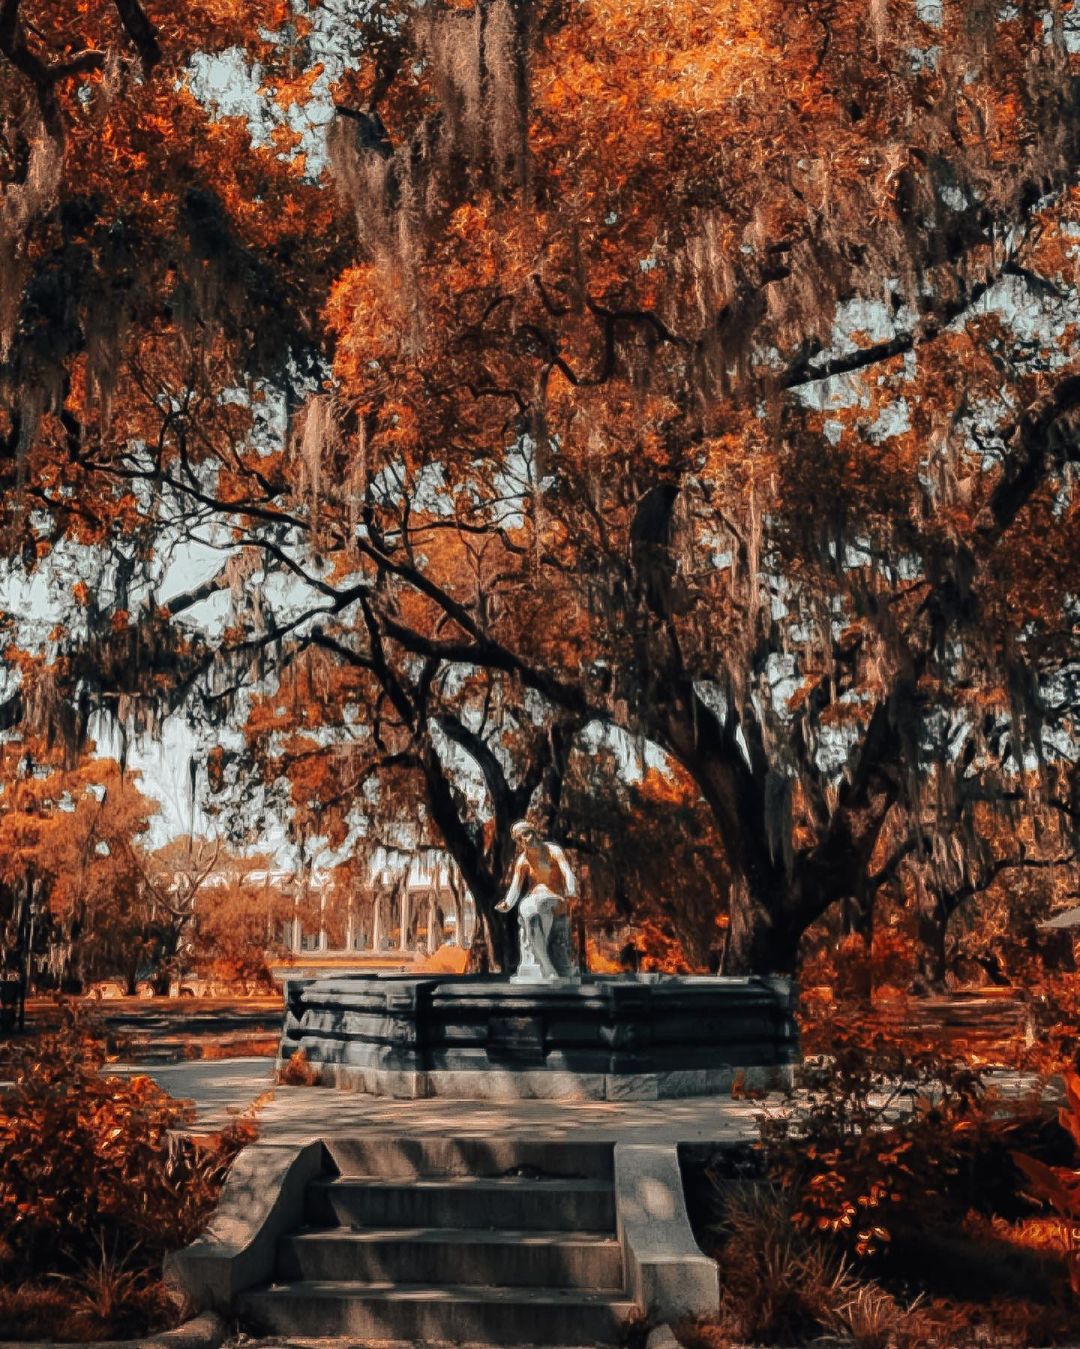 Colorful autumn leaves adorn City Park in New Orleans